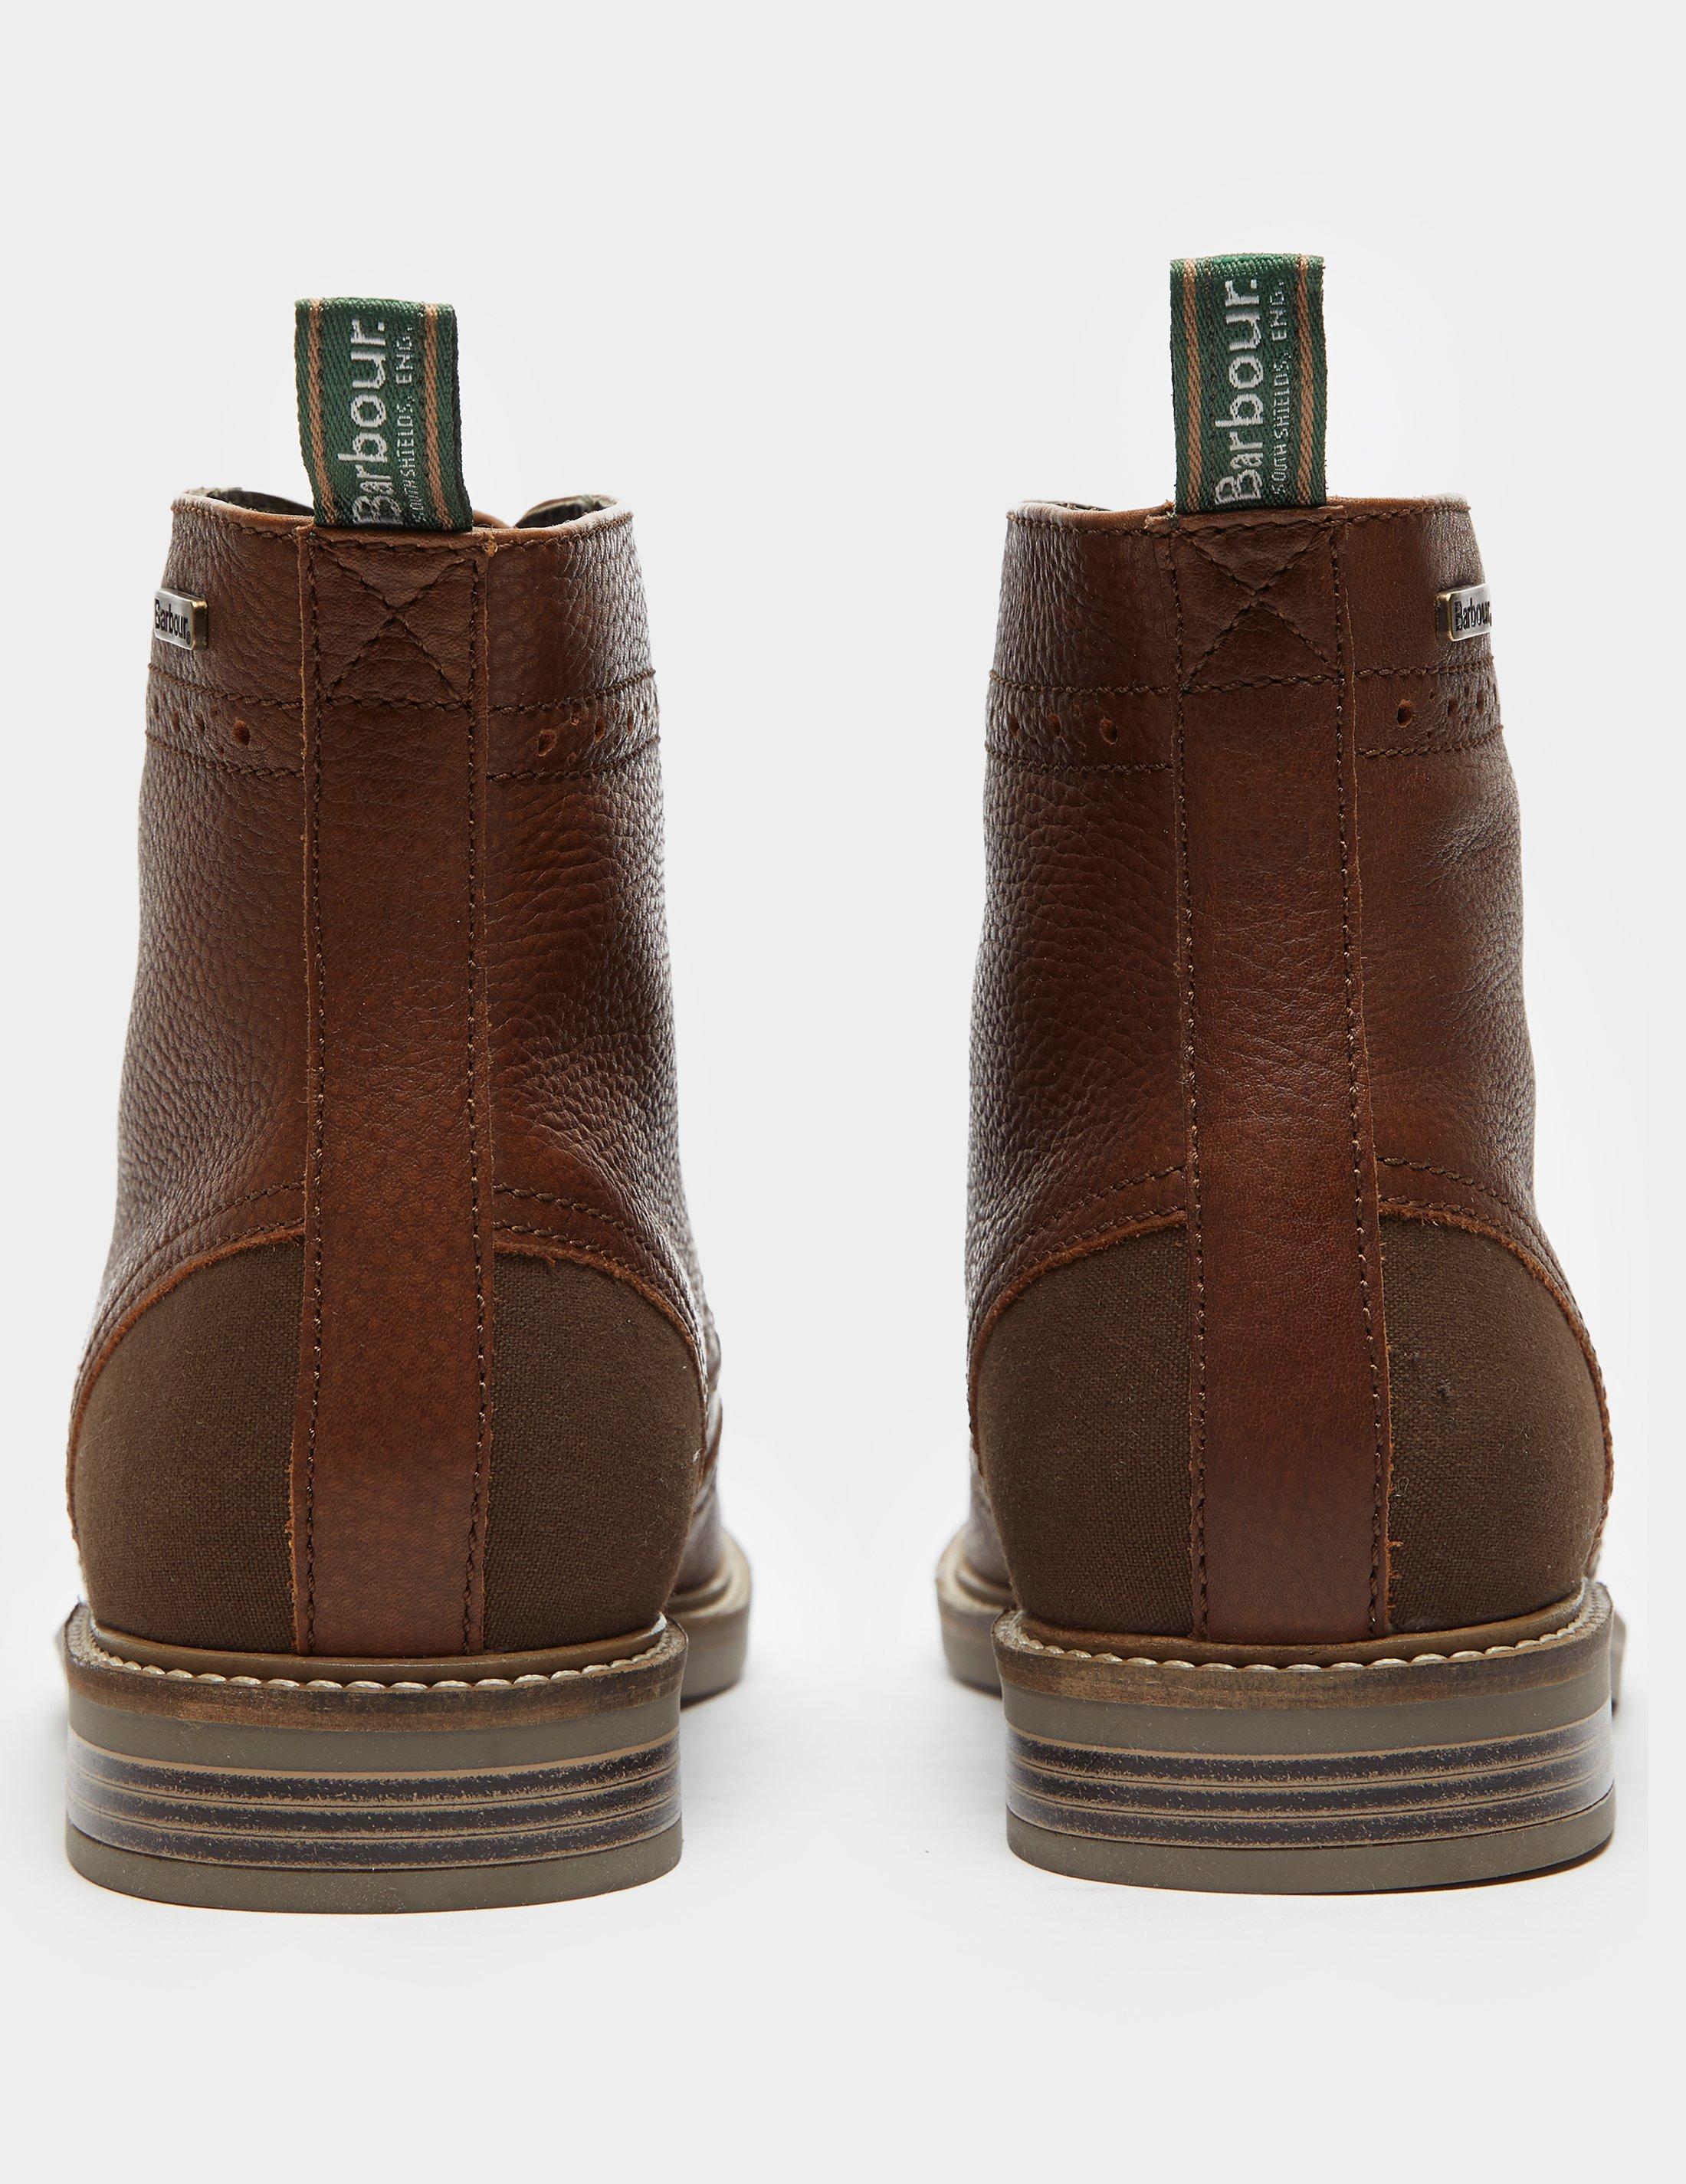 Barbour Belsay Boots Brown Clearance, 54% OFF | www.ingeniovirtual.com